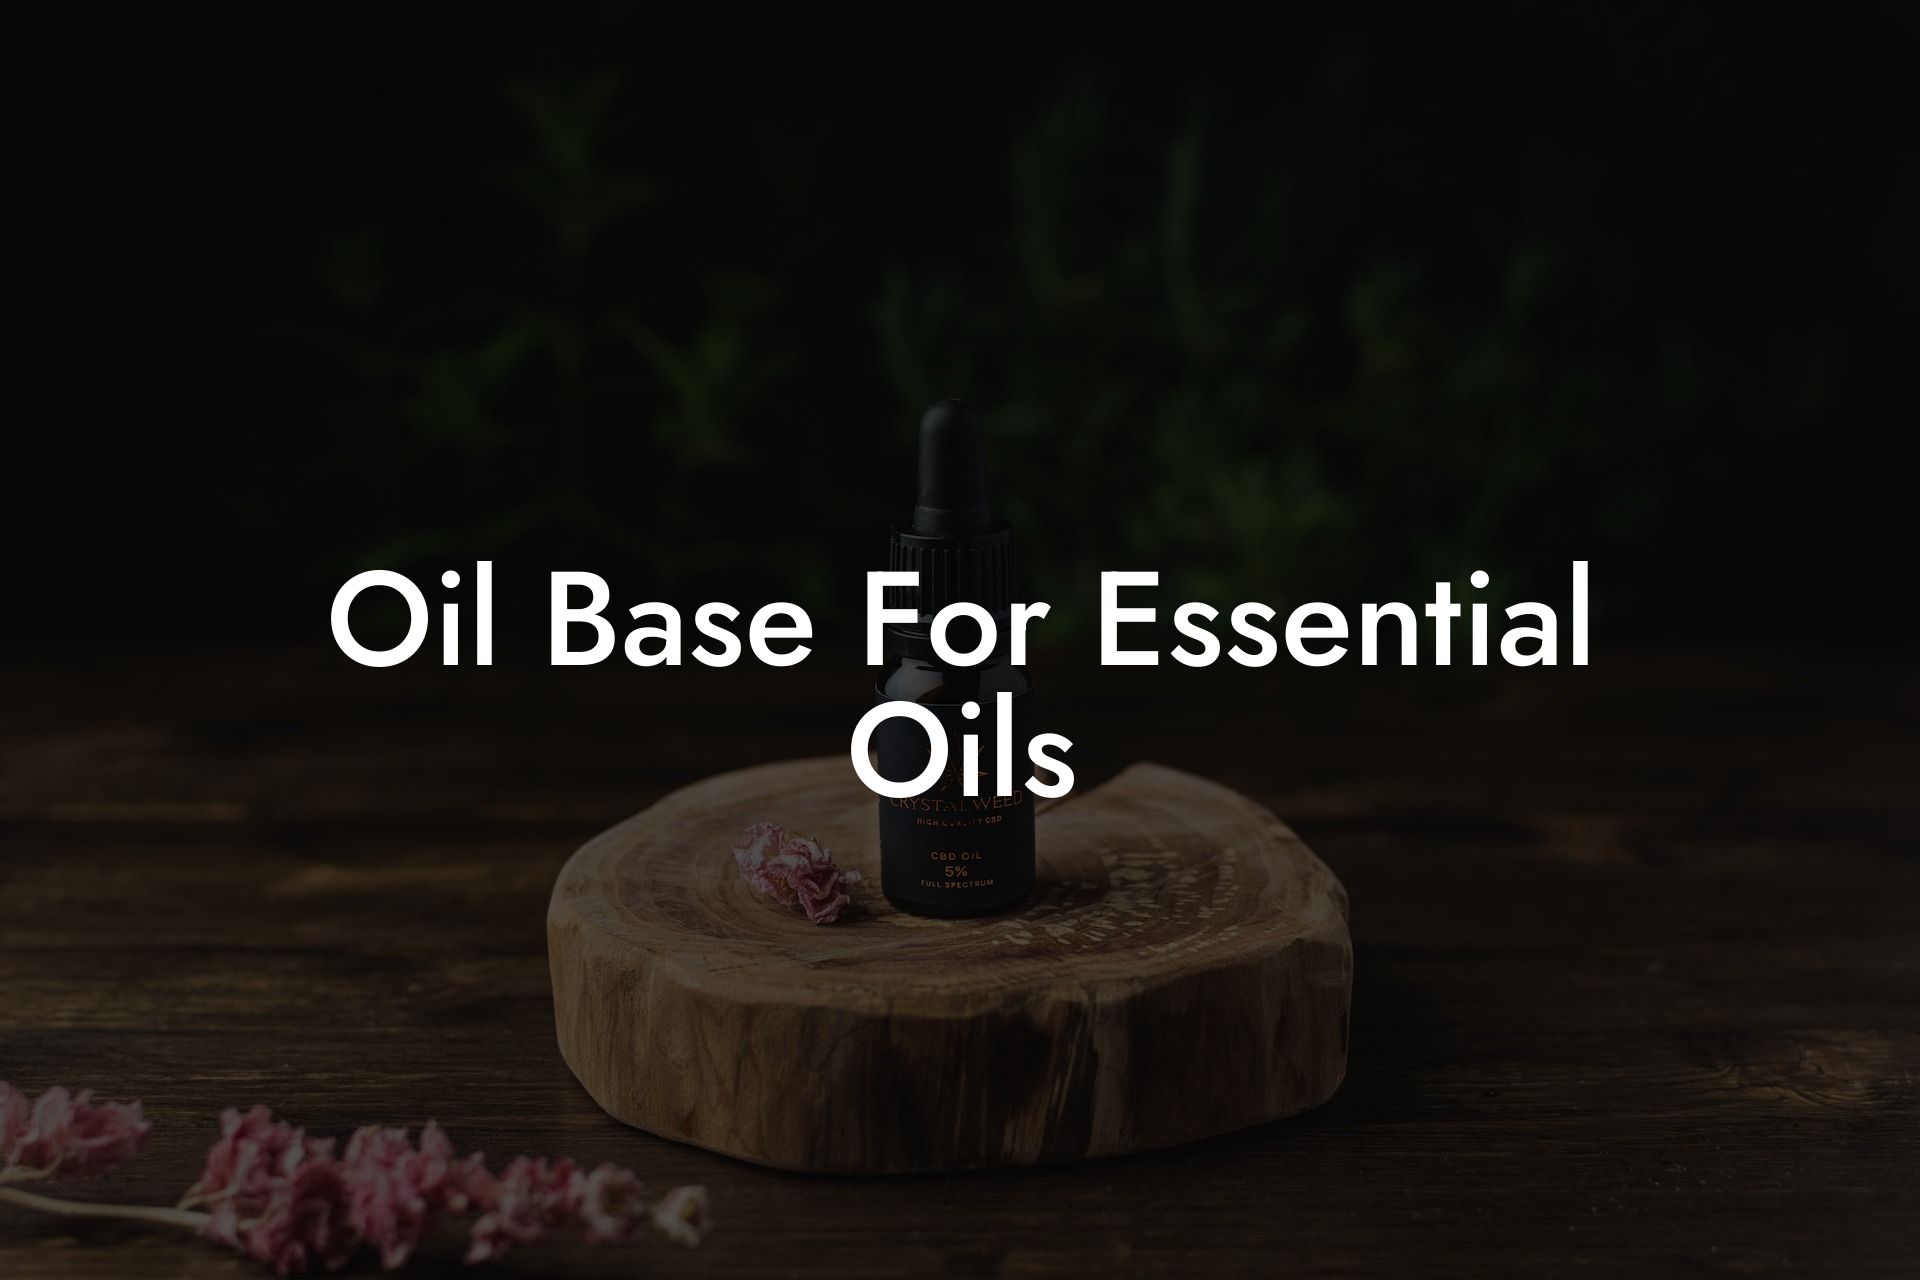 Oil Base For Essential Oils